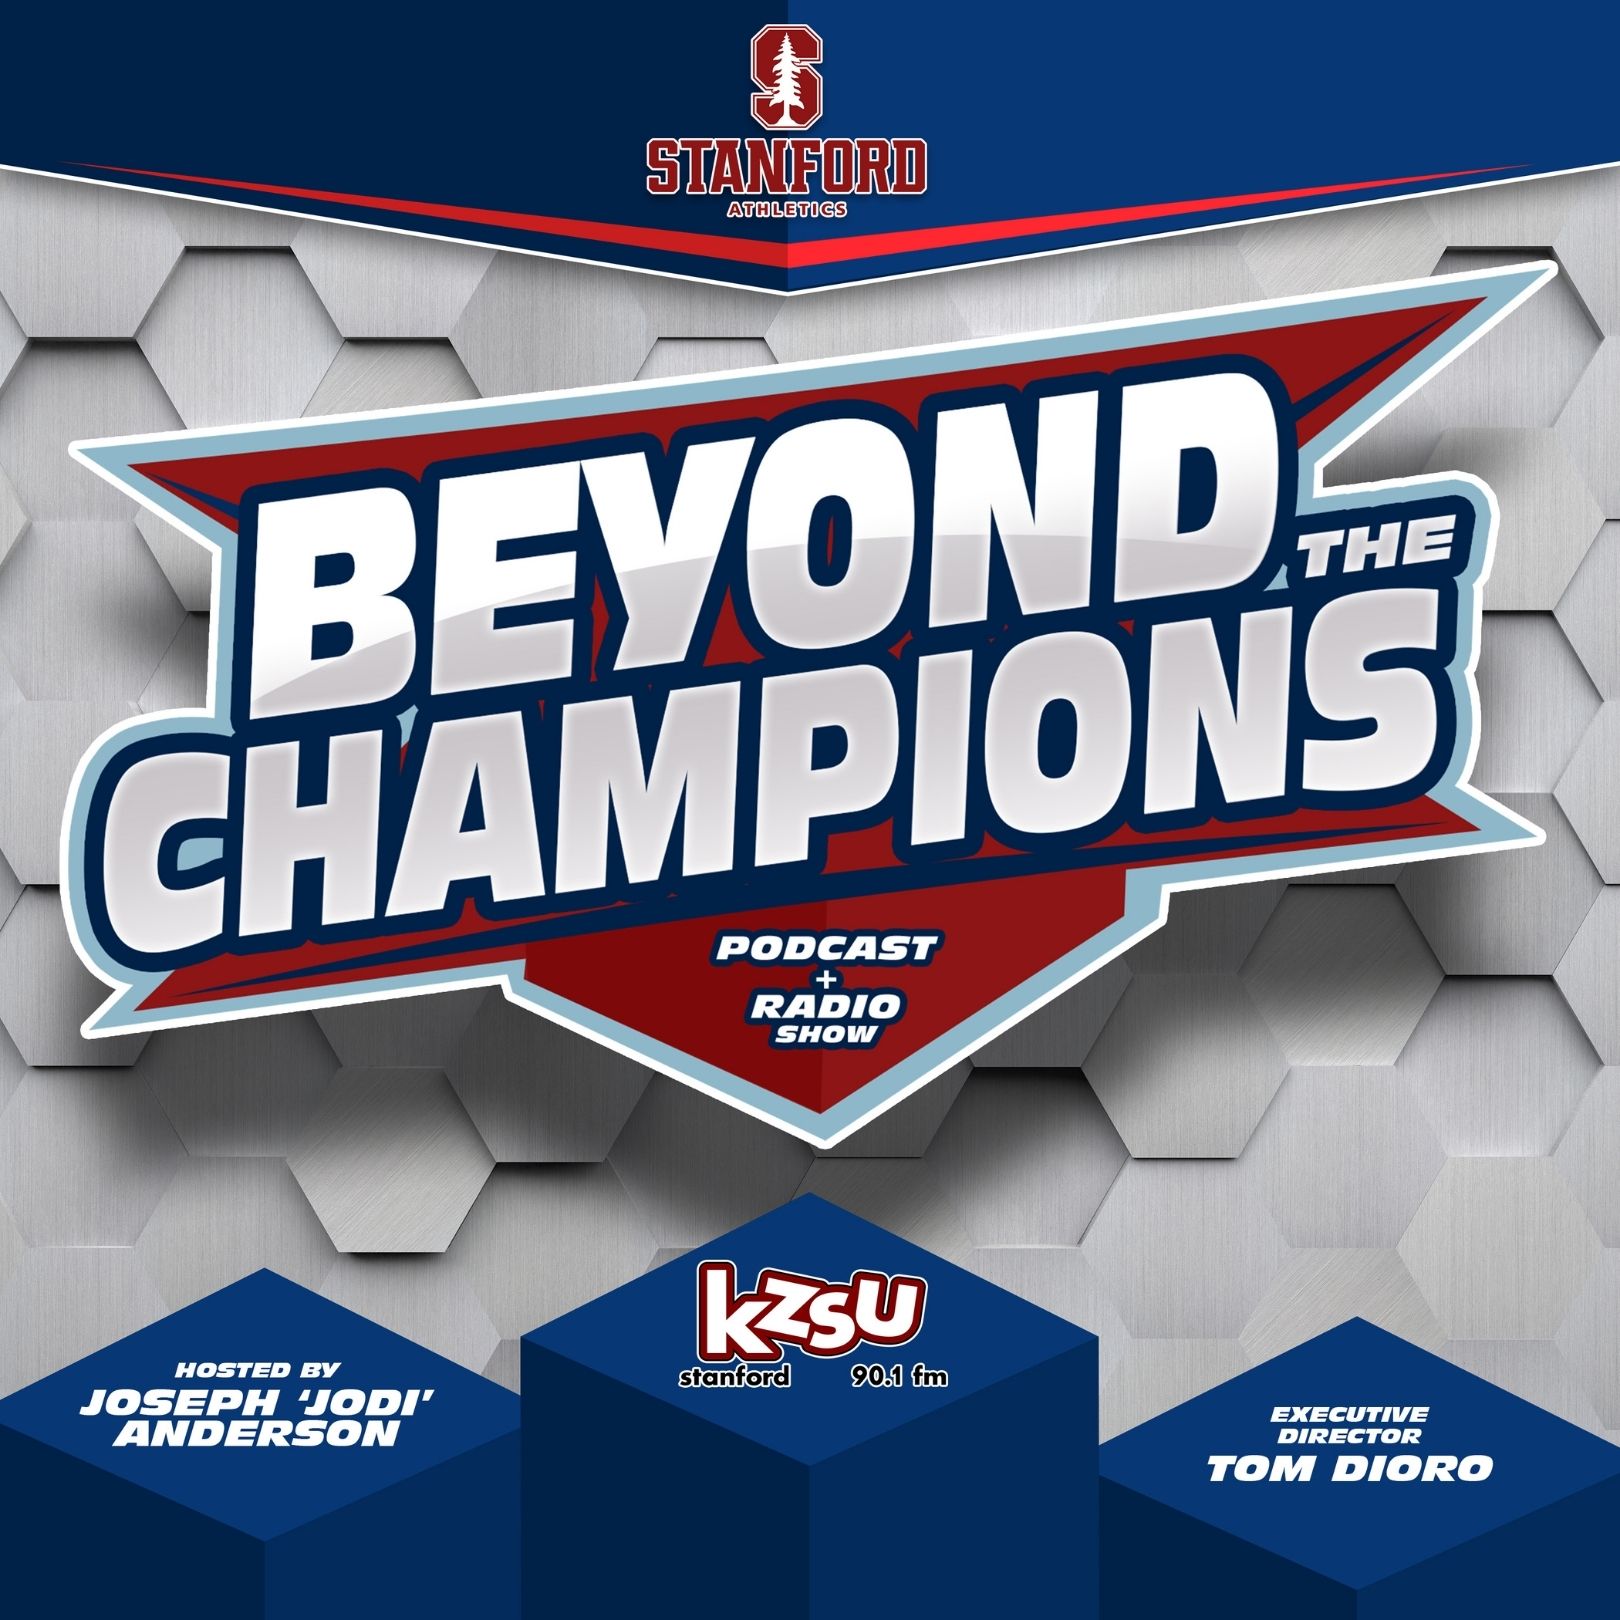 Artwork for podcast Beyond the Champions